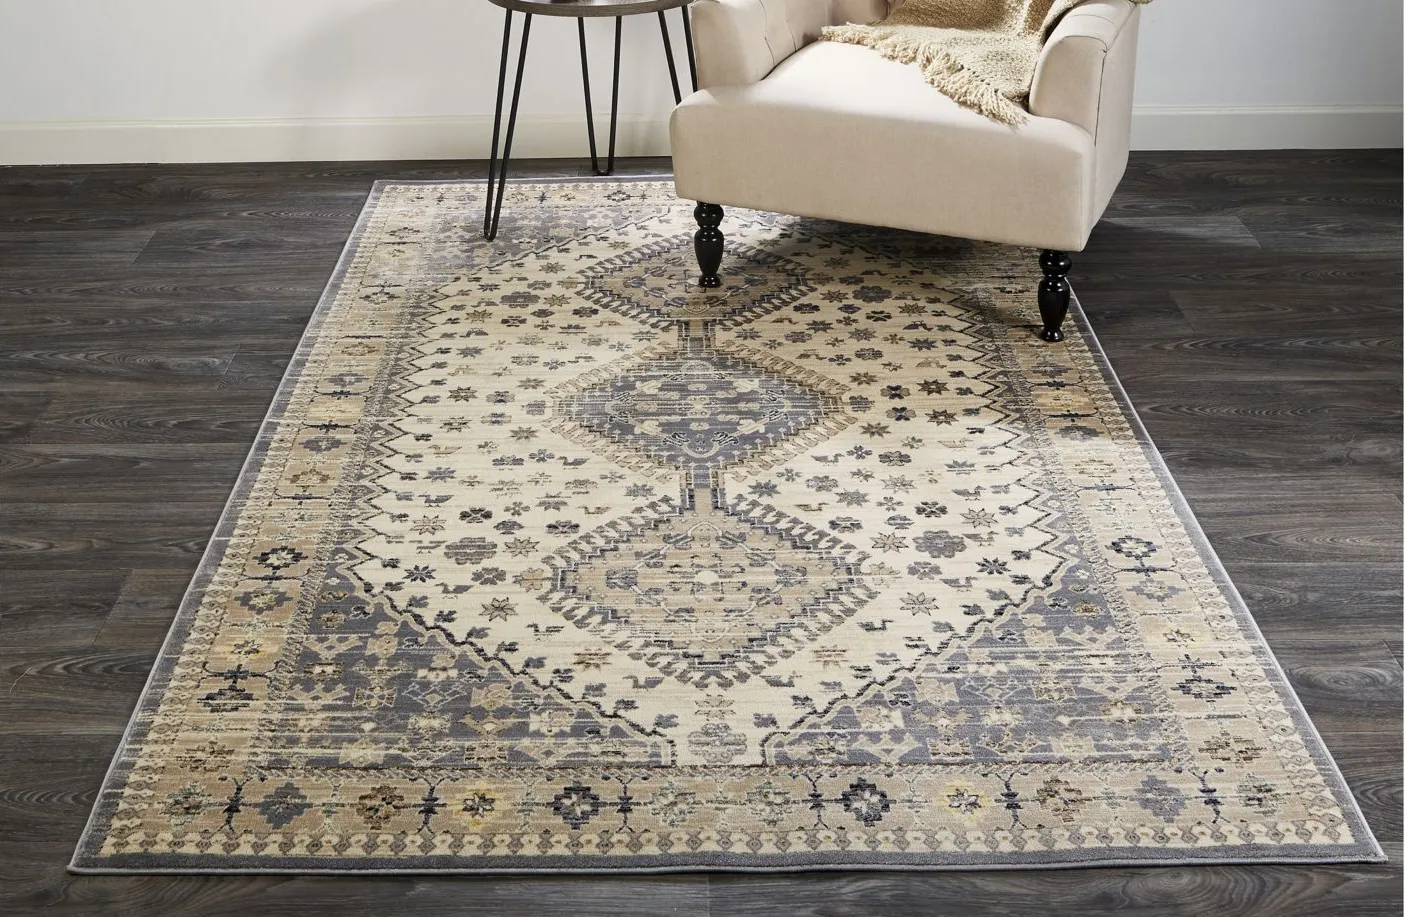 Grayson Gebbah Style Kilim Area Rug in Charcoal Gray by Feizy